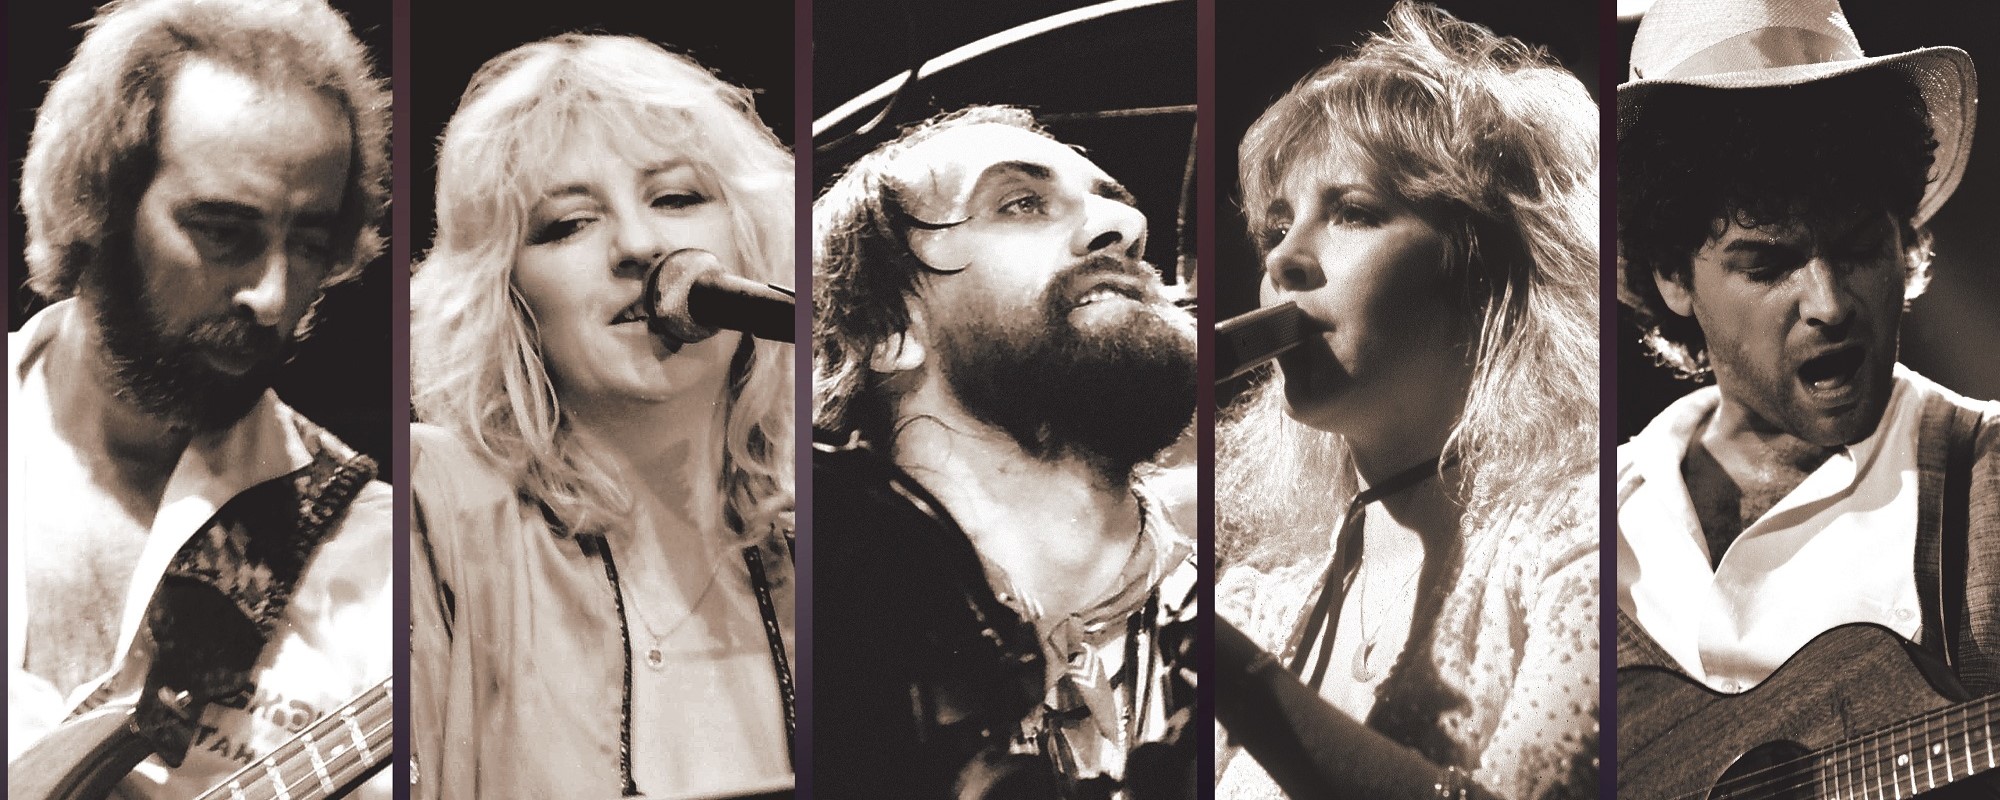 Fleetwood Mac Releasing an Archival Concert Album Featuring Songs from Band’s 1982 ‘Mirage’ Tour